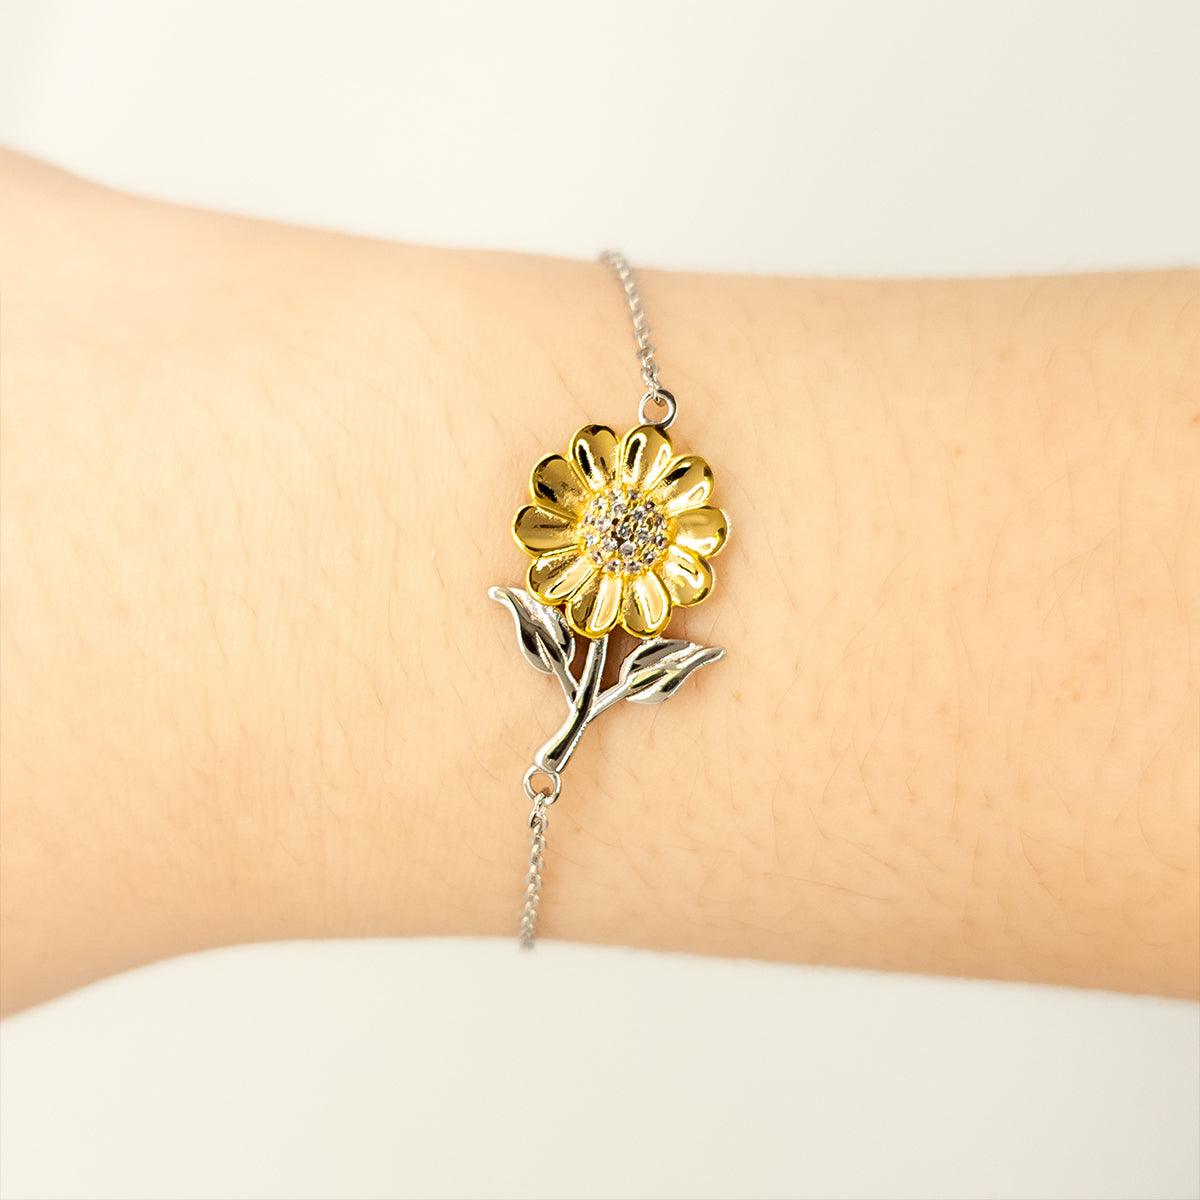 Sarcastic X-Ray Technician Sunflower Bracelet Gifts, Christmas Holiday Gifts for X-Ray Technician Birthday Message Card, X-Ray Technician: Because greatness is woven into the fabric of every day, Coworkers, Friends - Mallard Moon Gift Shop